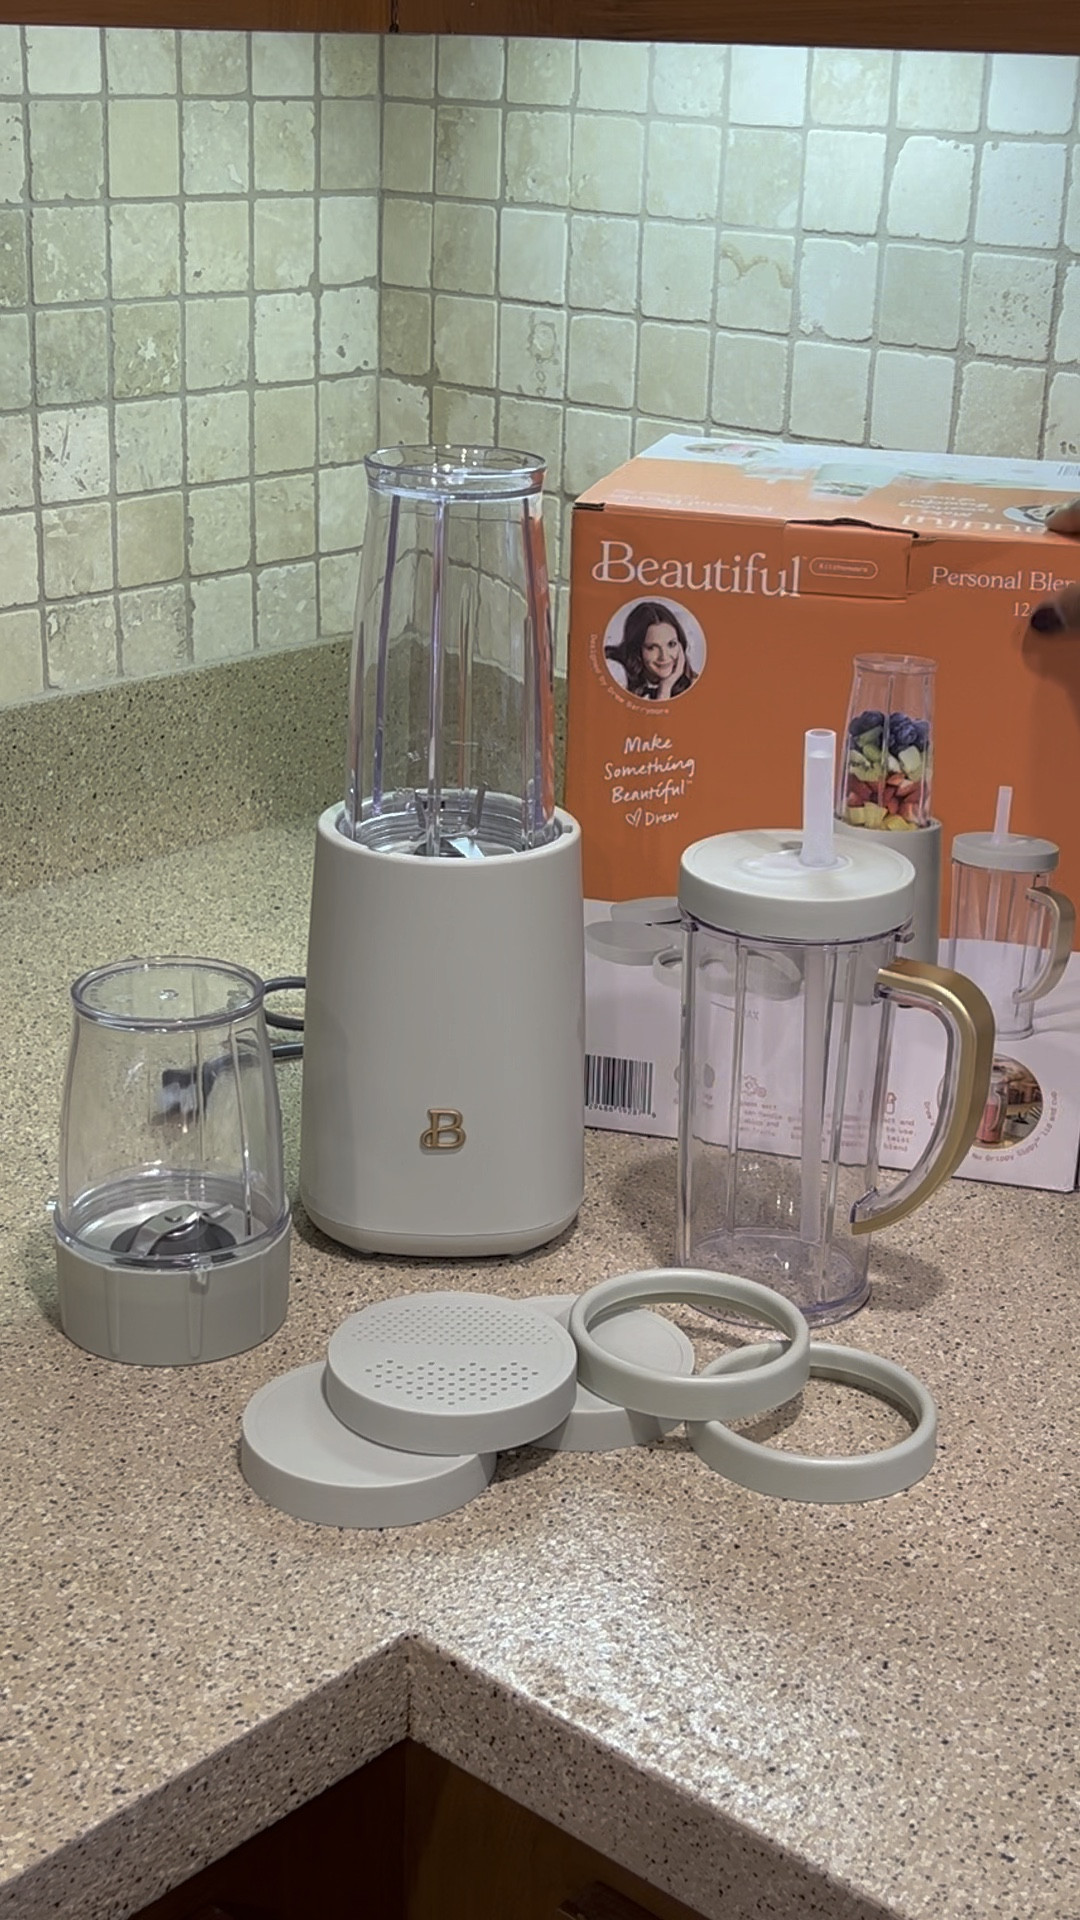 Beautiful 2-Speed Immersion Blender with Chopper & Measuring Cup, Oyster  Grey by Drew Barrymore